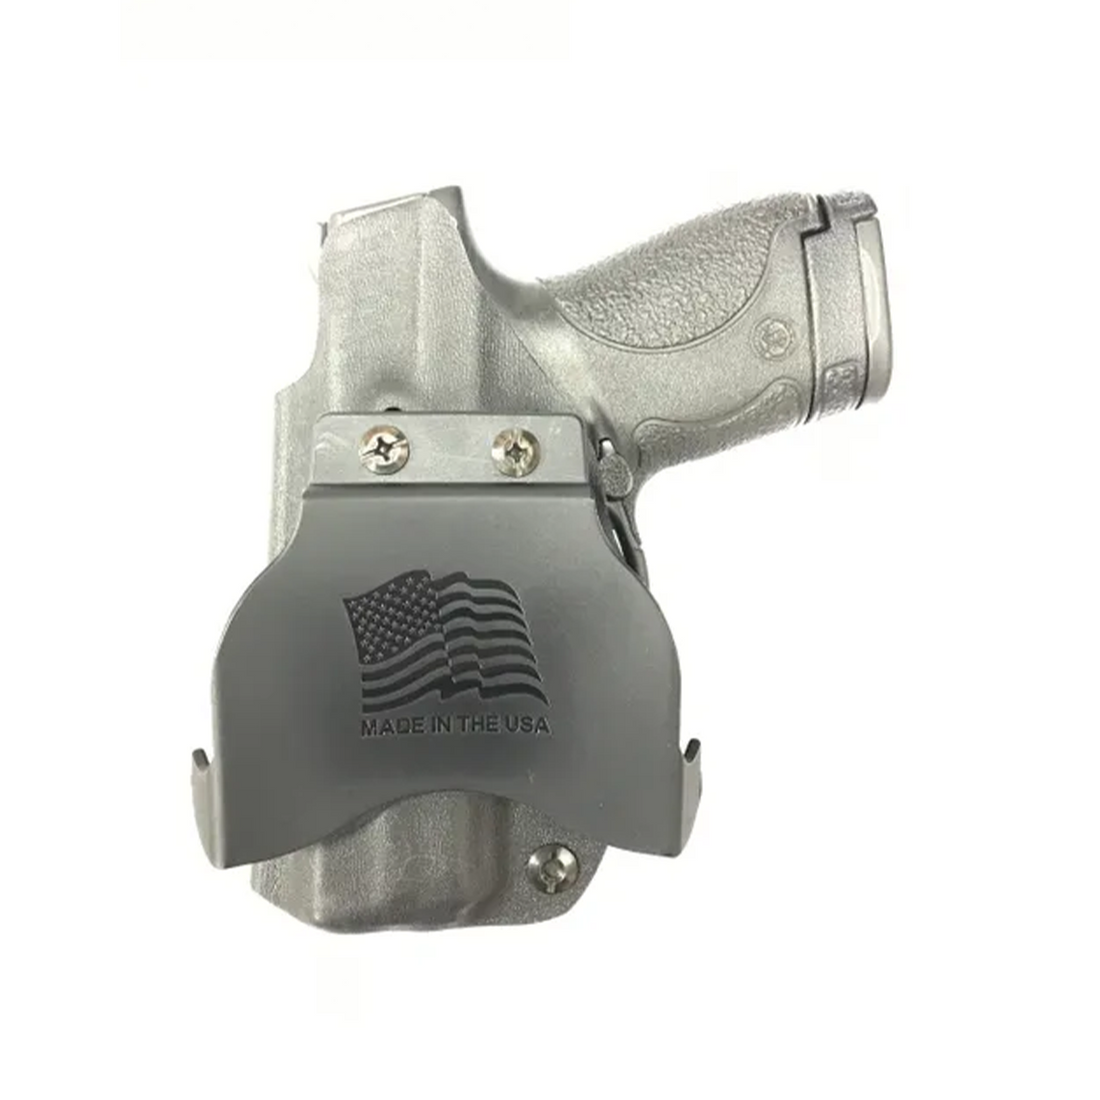 Smith & Wesson IWB/OWB 2-n-1 Paddle Holsters